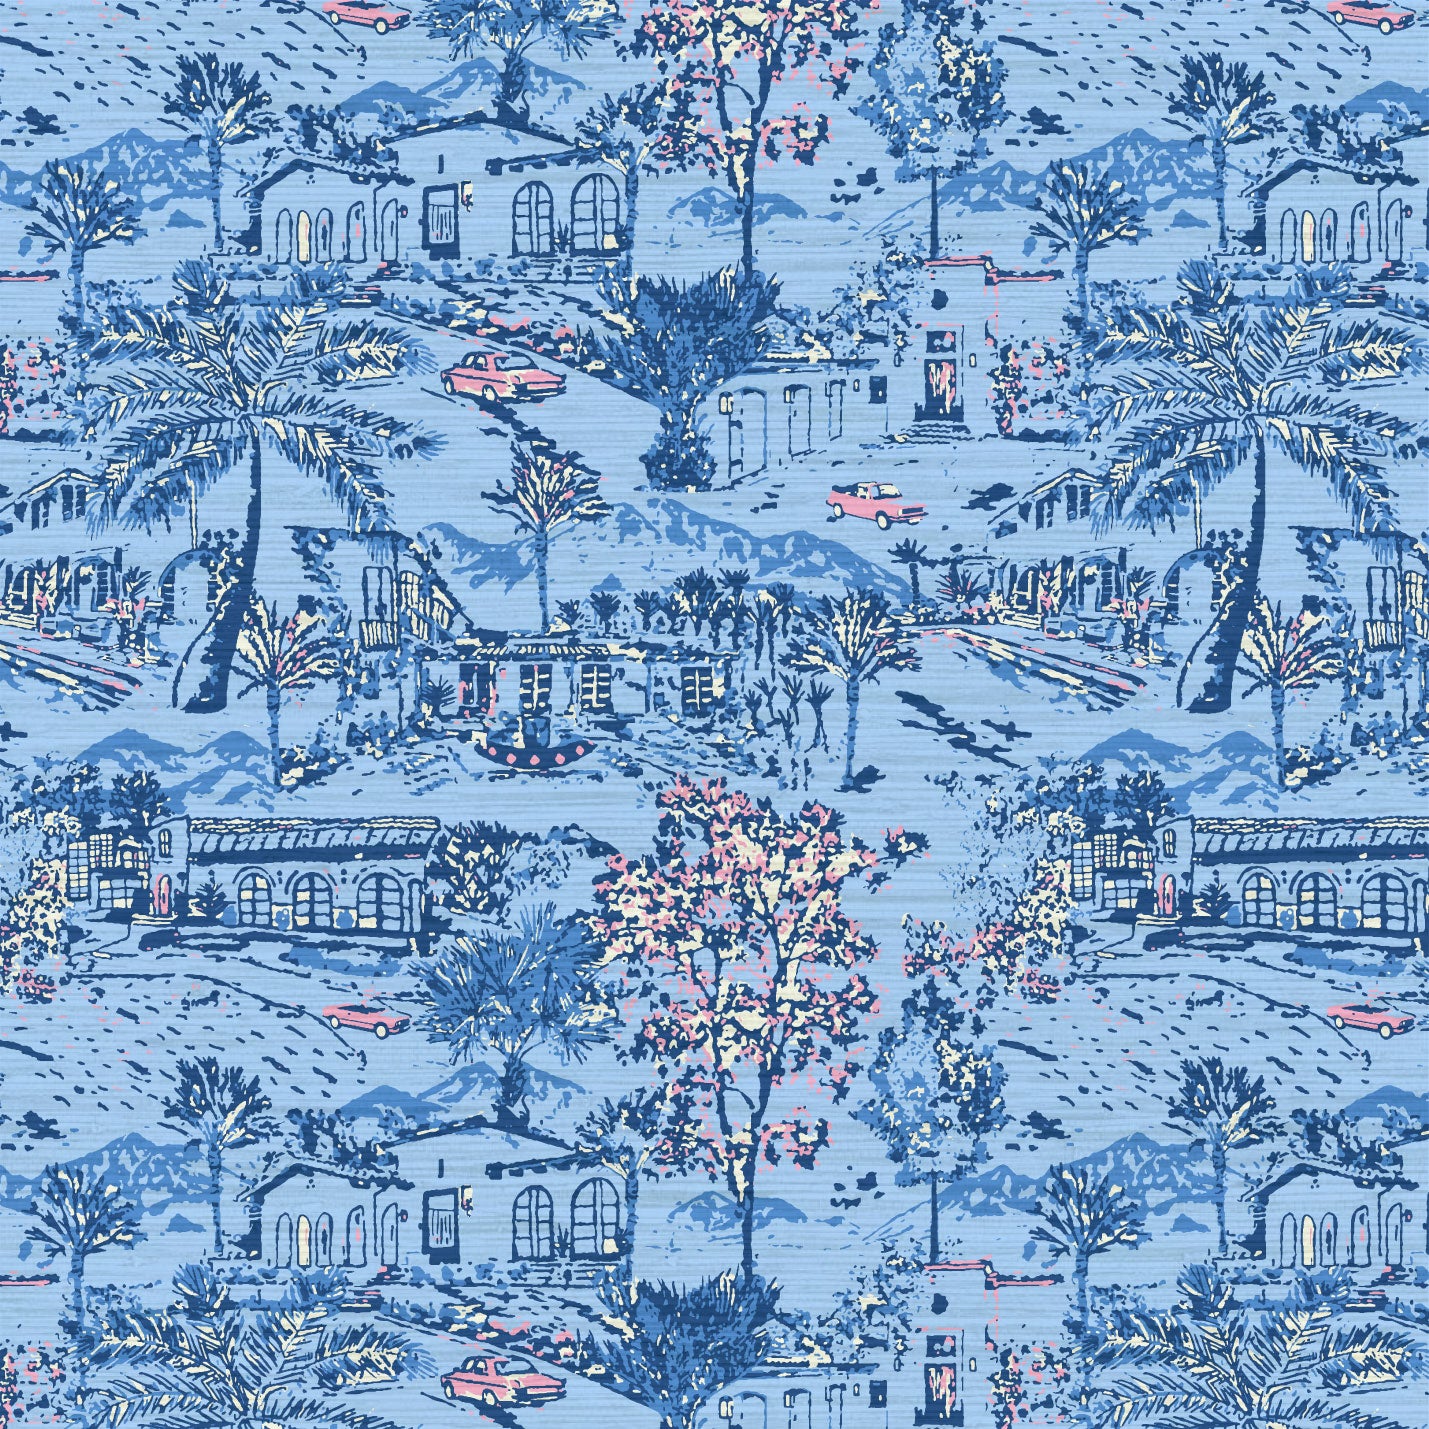 printed grasscloth wallpaper of a toile print on a french blue base with dark blue outlines and white and pink pops.  Featuring spanish style house architecture, mountains in the background and bountiful amounts of foliage and palm trees along with 1980s inspired sports cars.